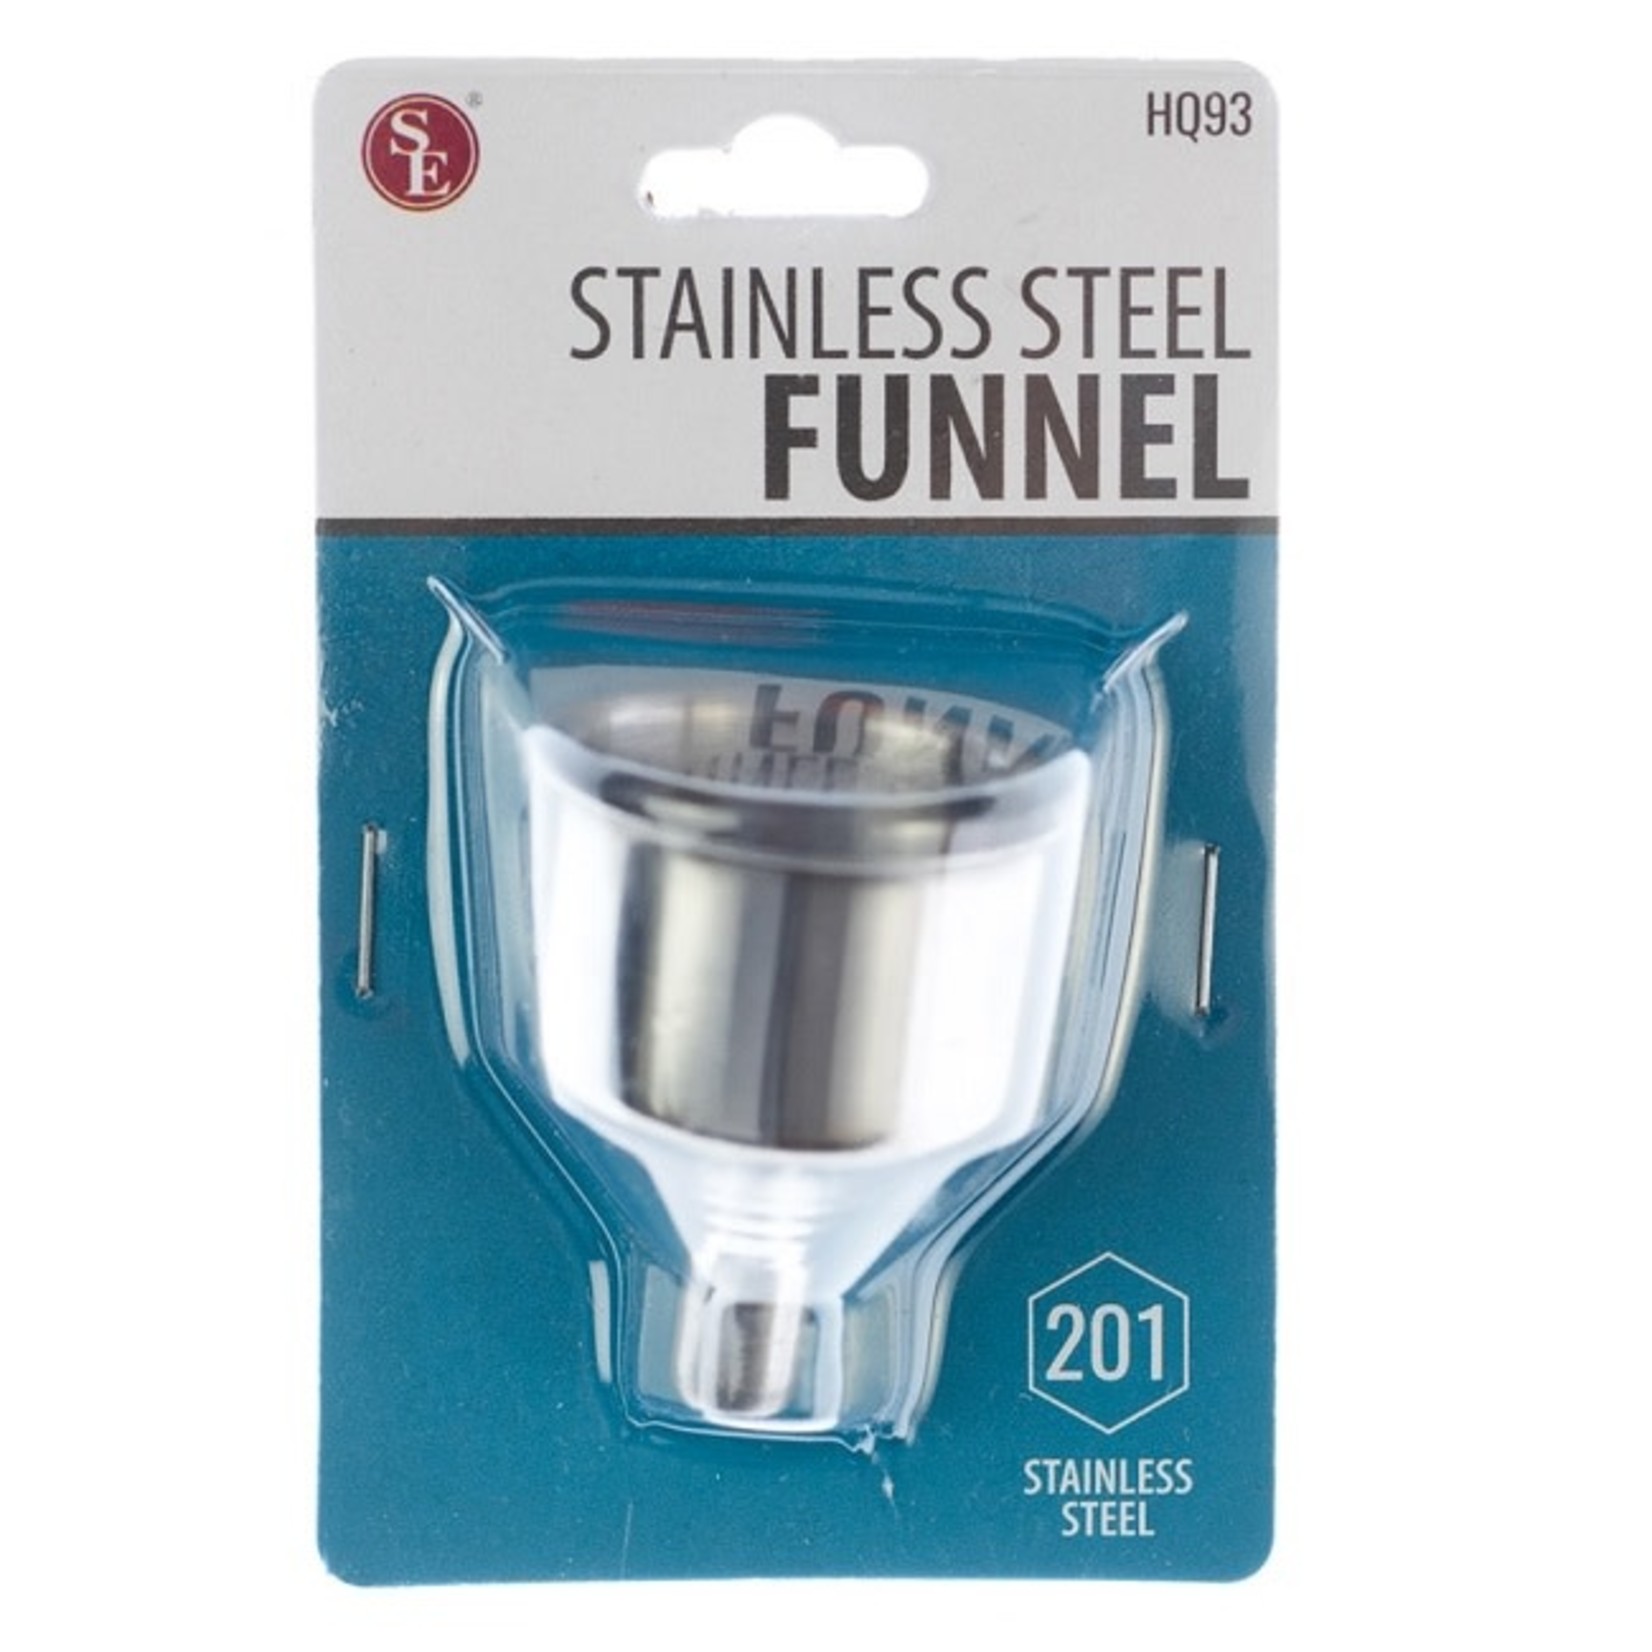 Sona SE Sm. Stainless Steel Funnel - 3/8" Spout